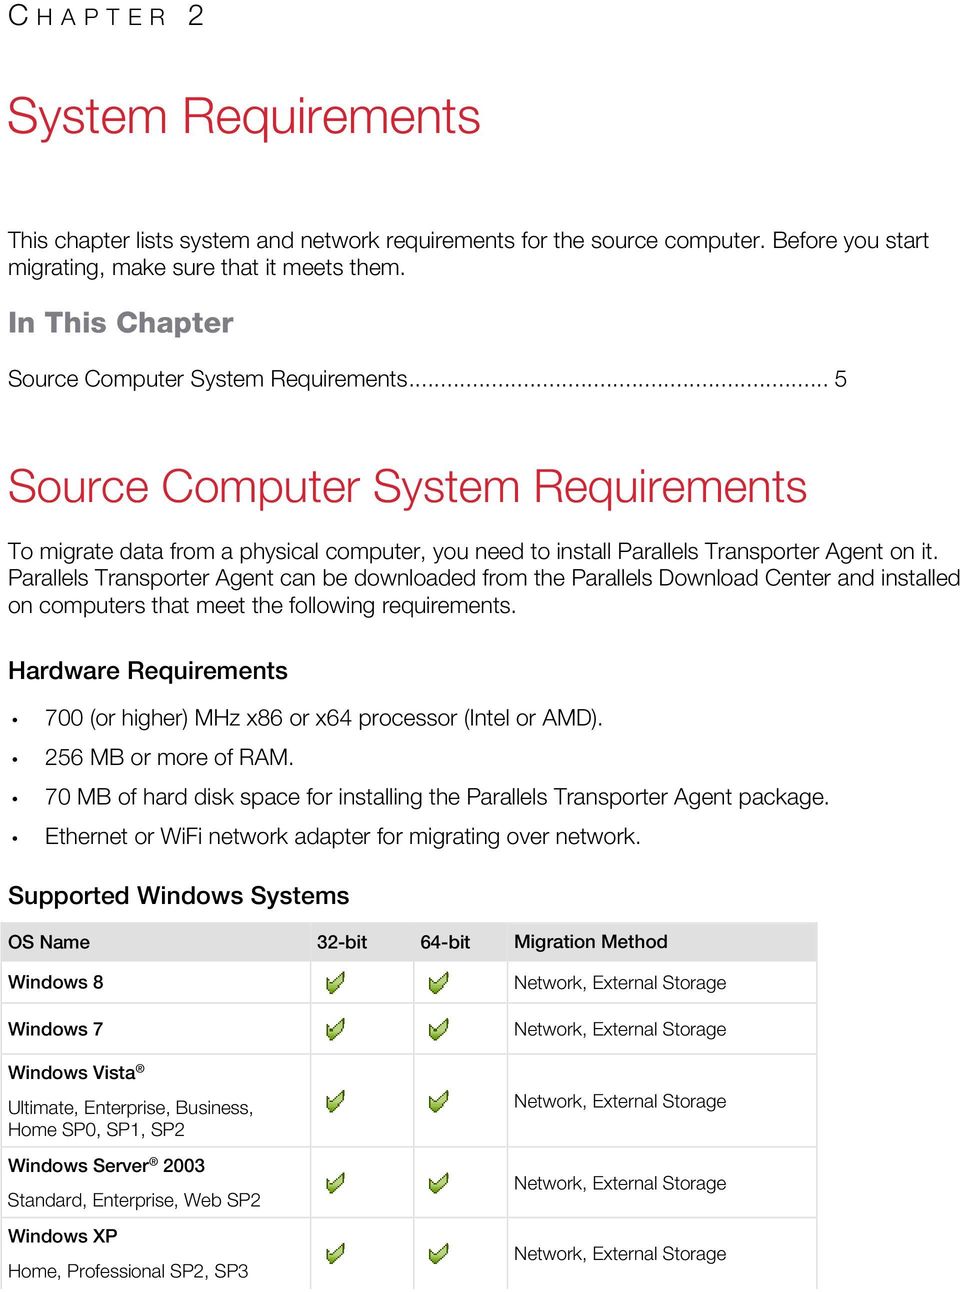 Parallels Transporter Agent can be downloaded from the Parallels Download Center and installed on computers that meet the following requirements.